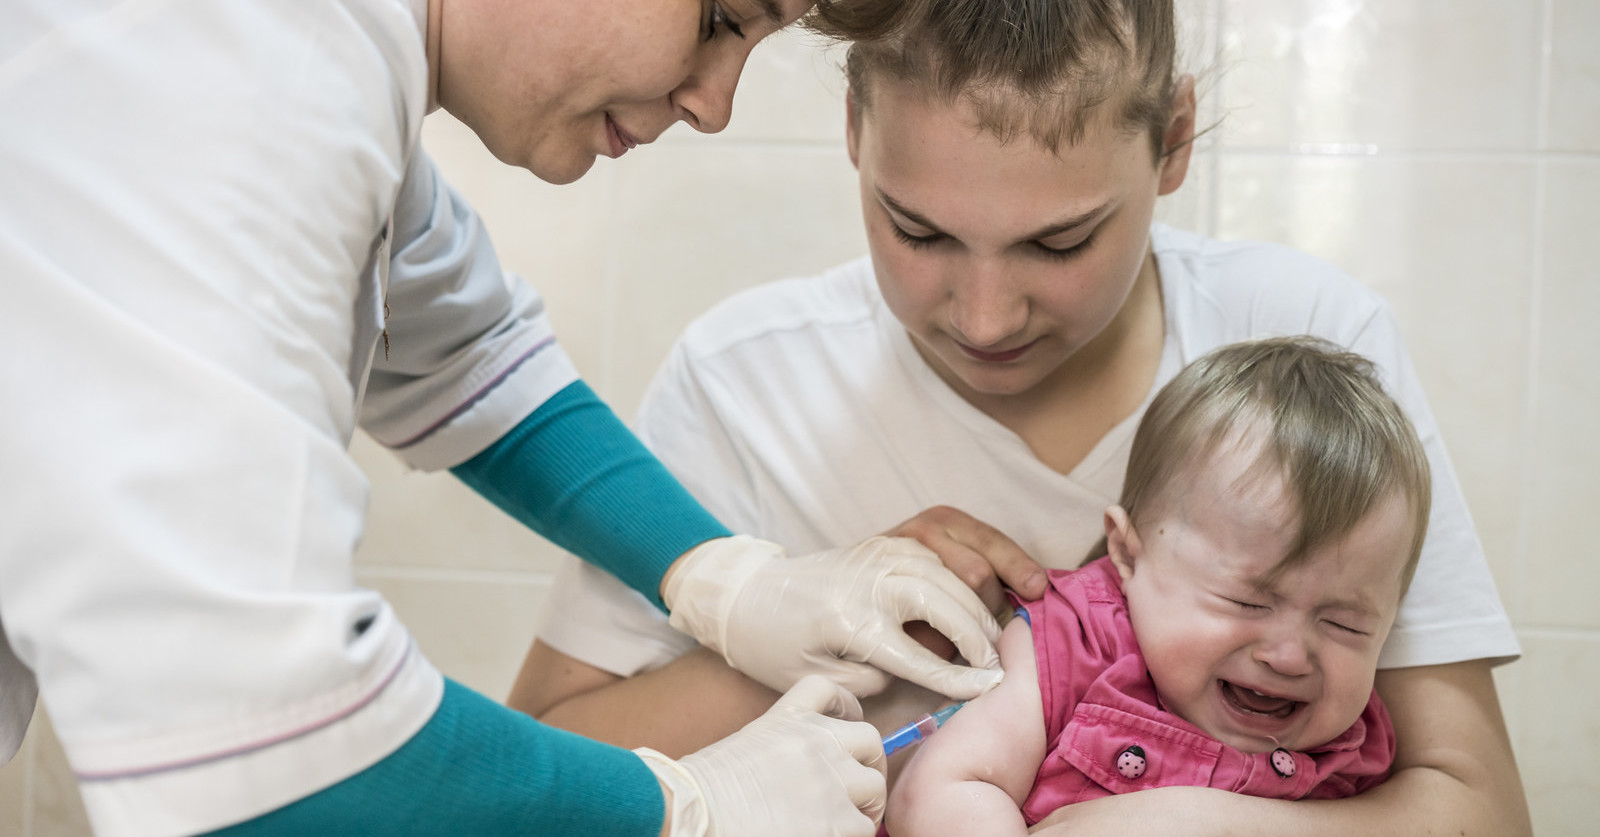 Wellcome Trust's Survey Lists The World's Most Anti-Vaccine Countries